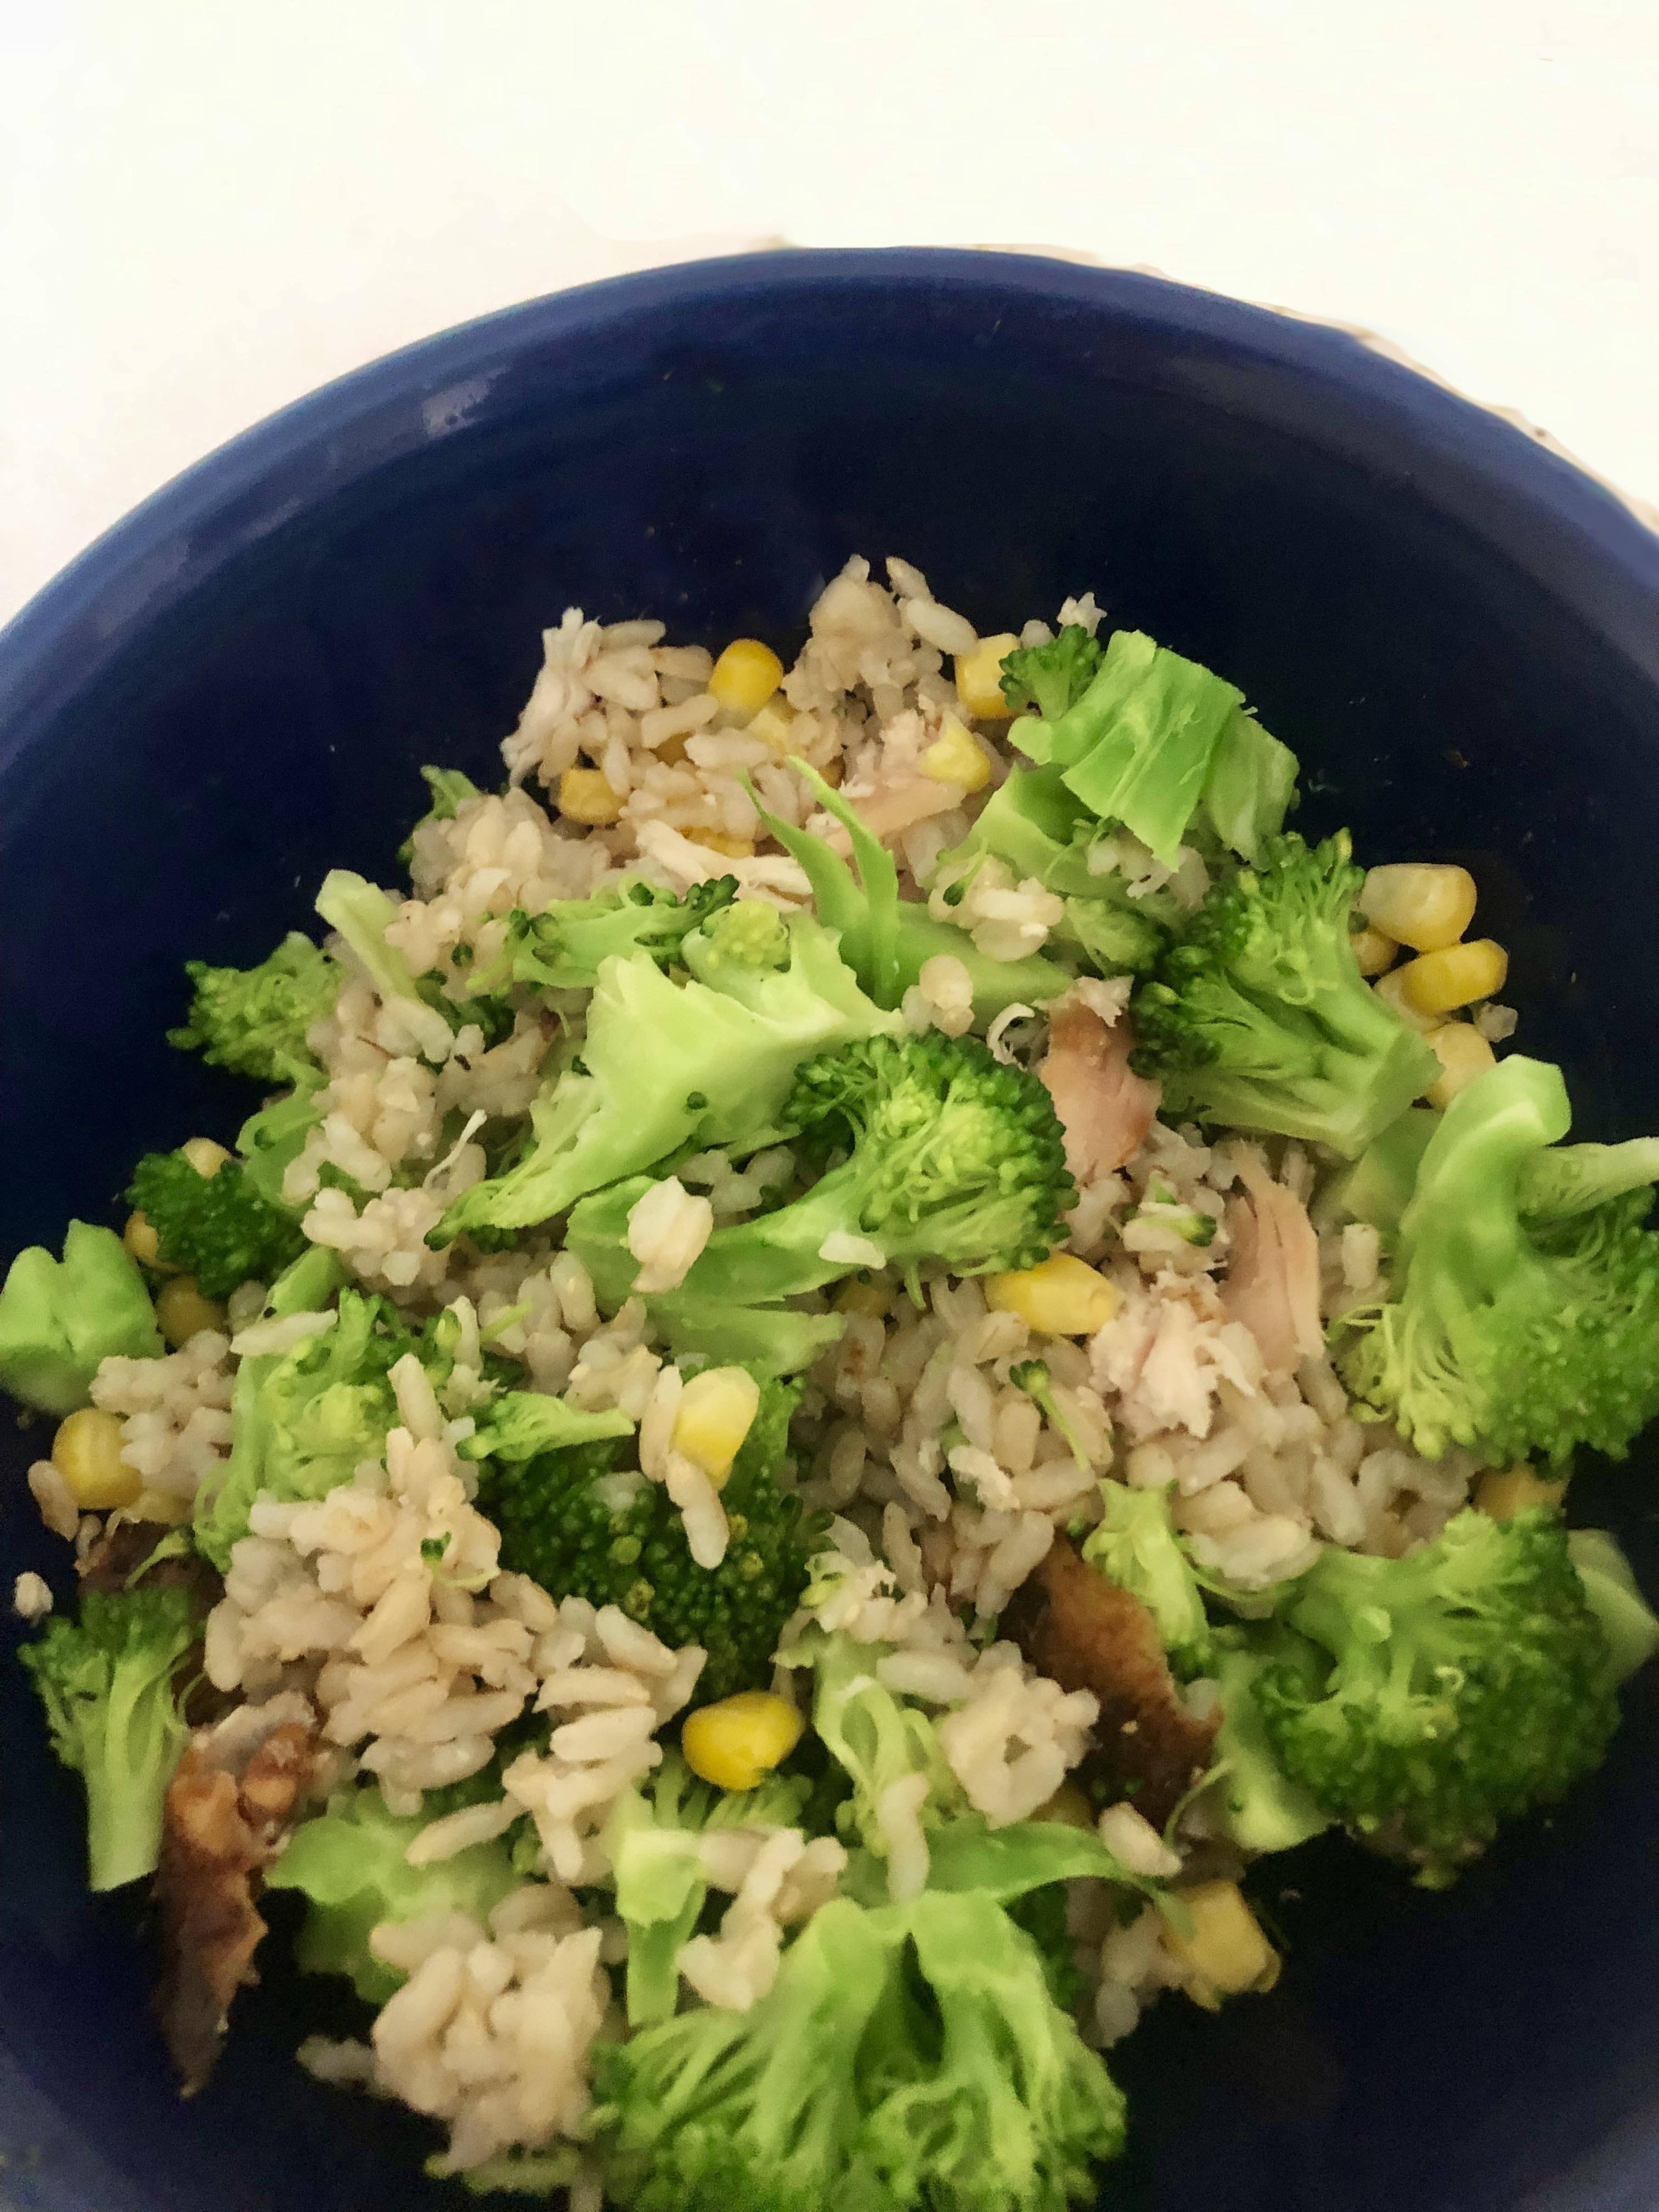 Rice bowls are easy for Add-In Diet Breakfast